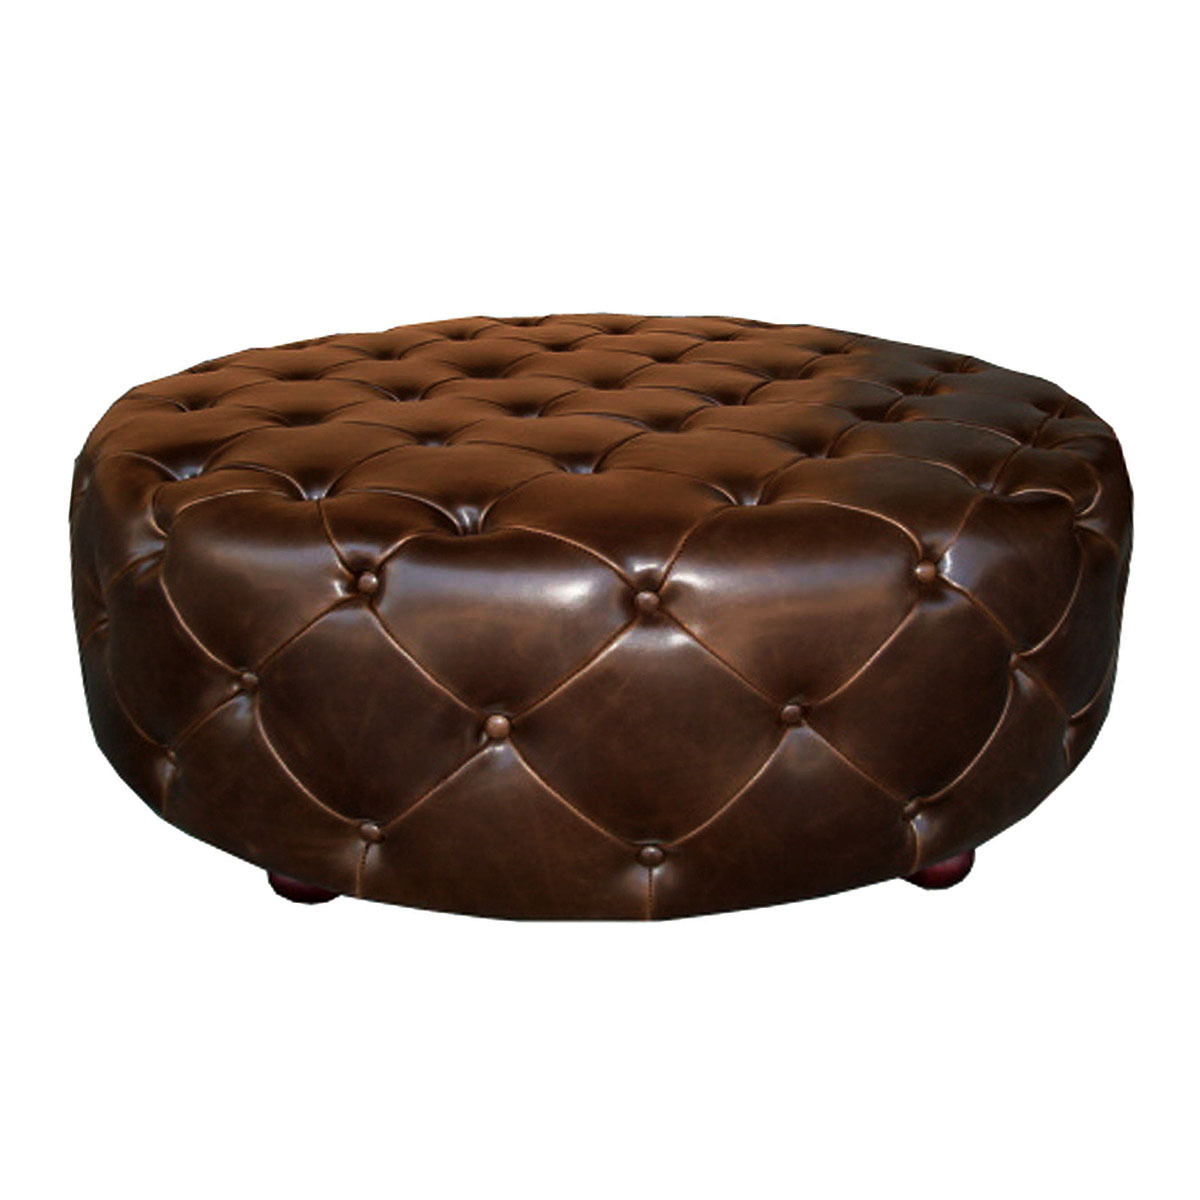 Round tufted ottoman coffee table 6